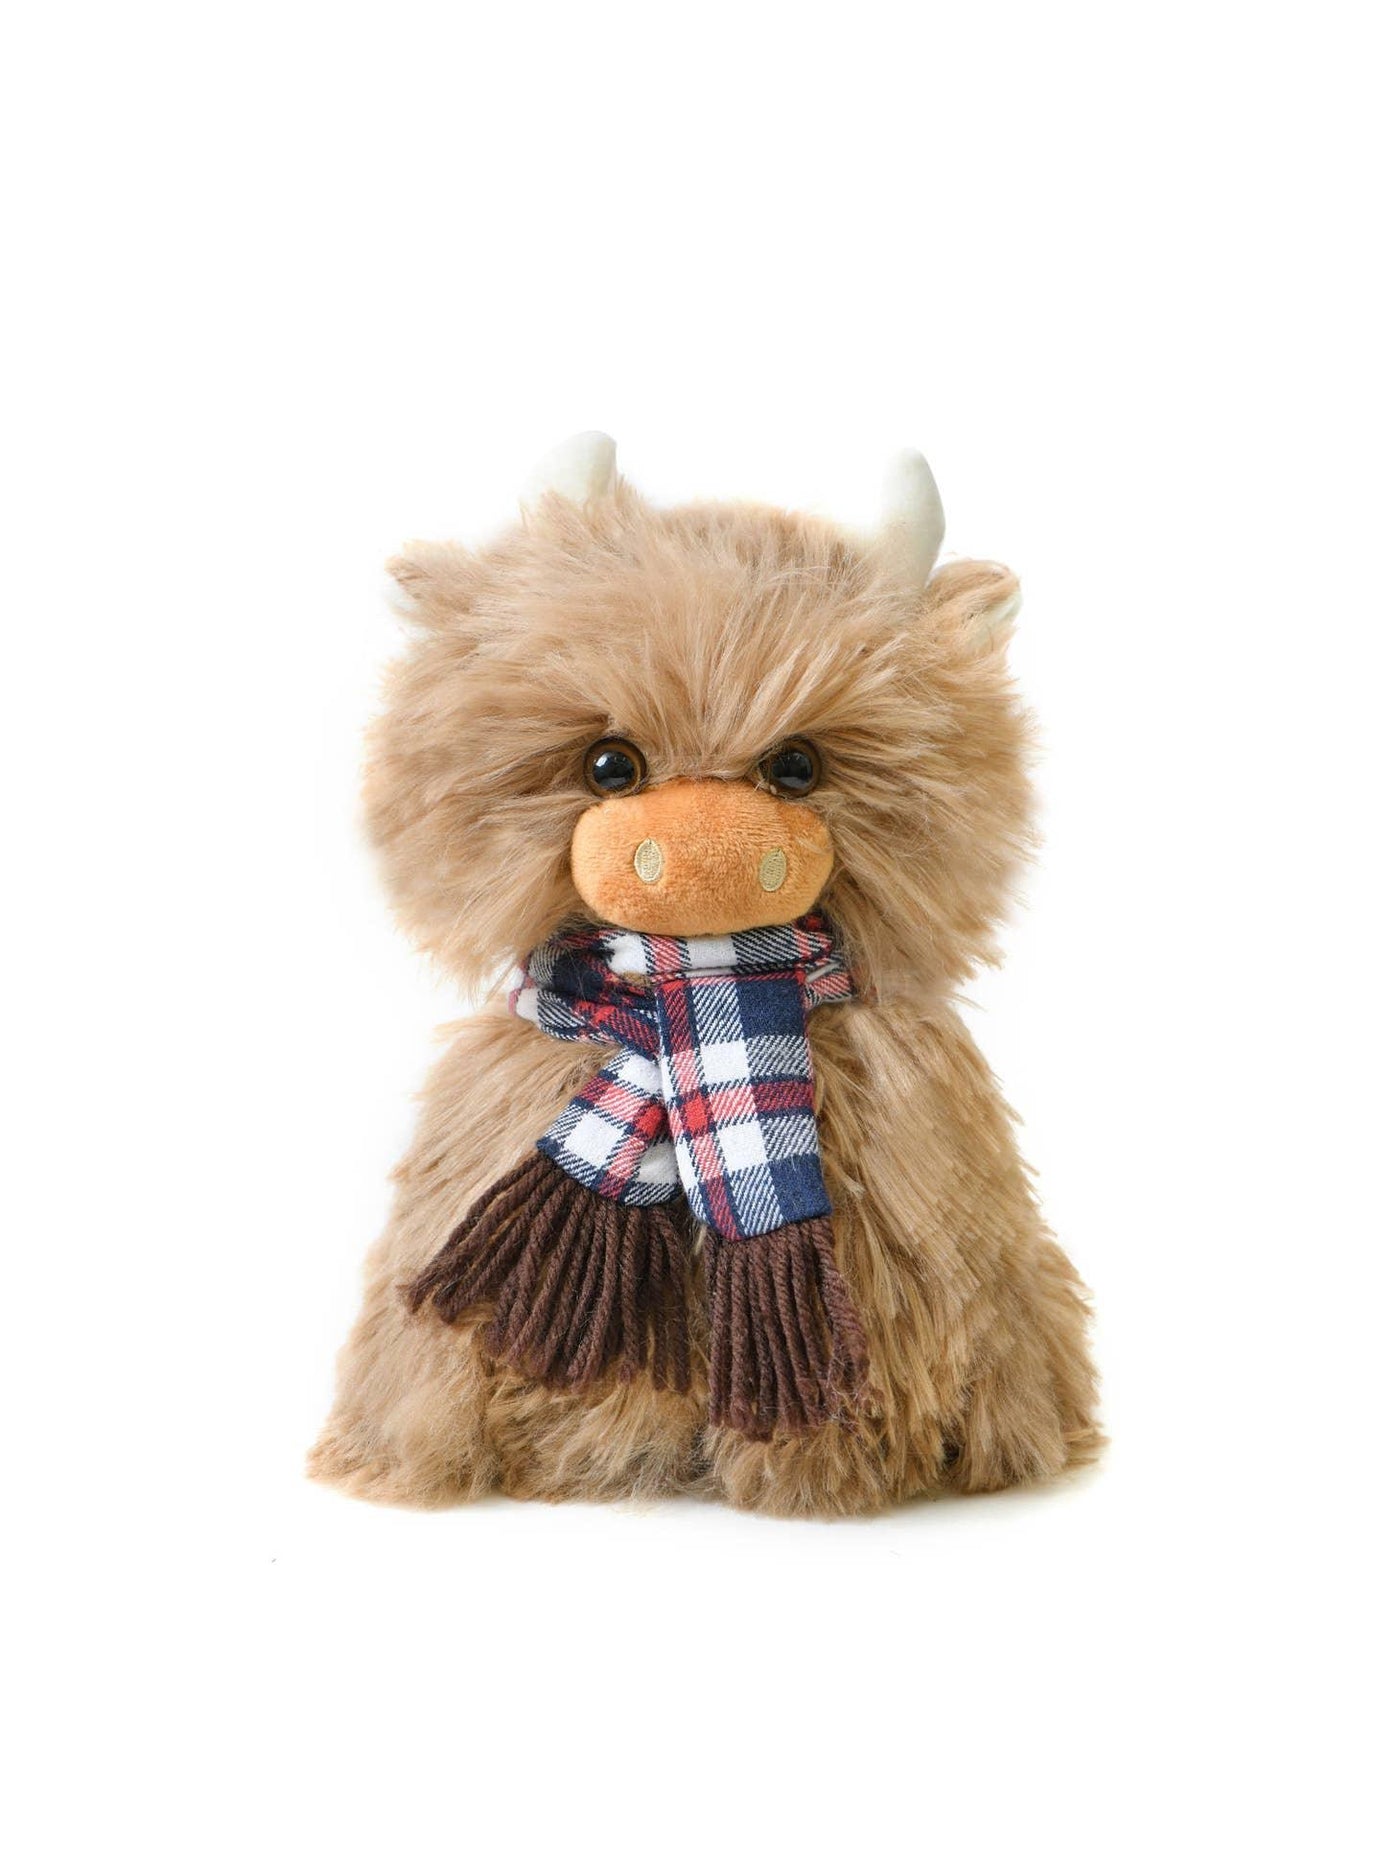 Angus the Highland Cow - Islander - The Sock Monster